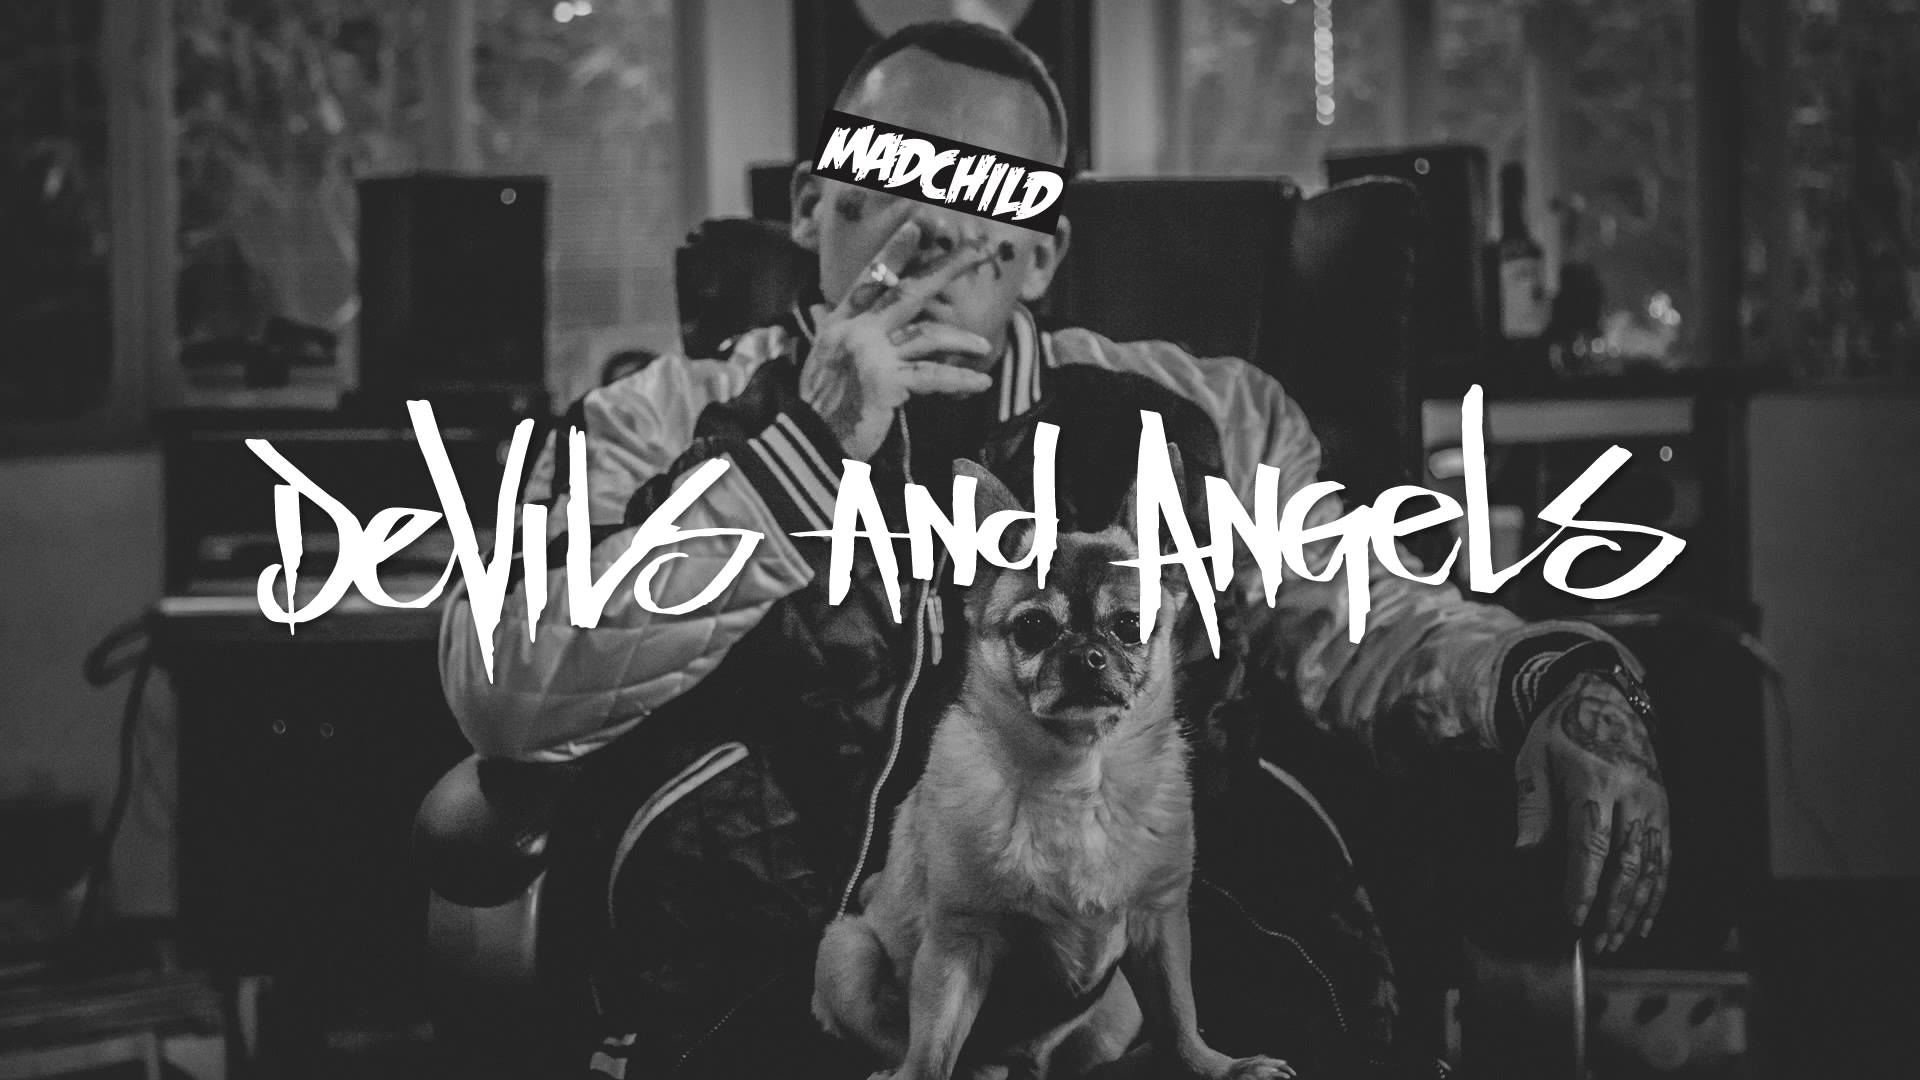 Madchild Devils And Angels Audio Faygoluvers Mobile Theme